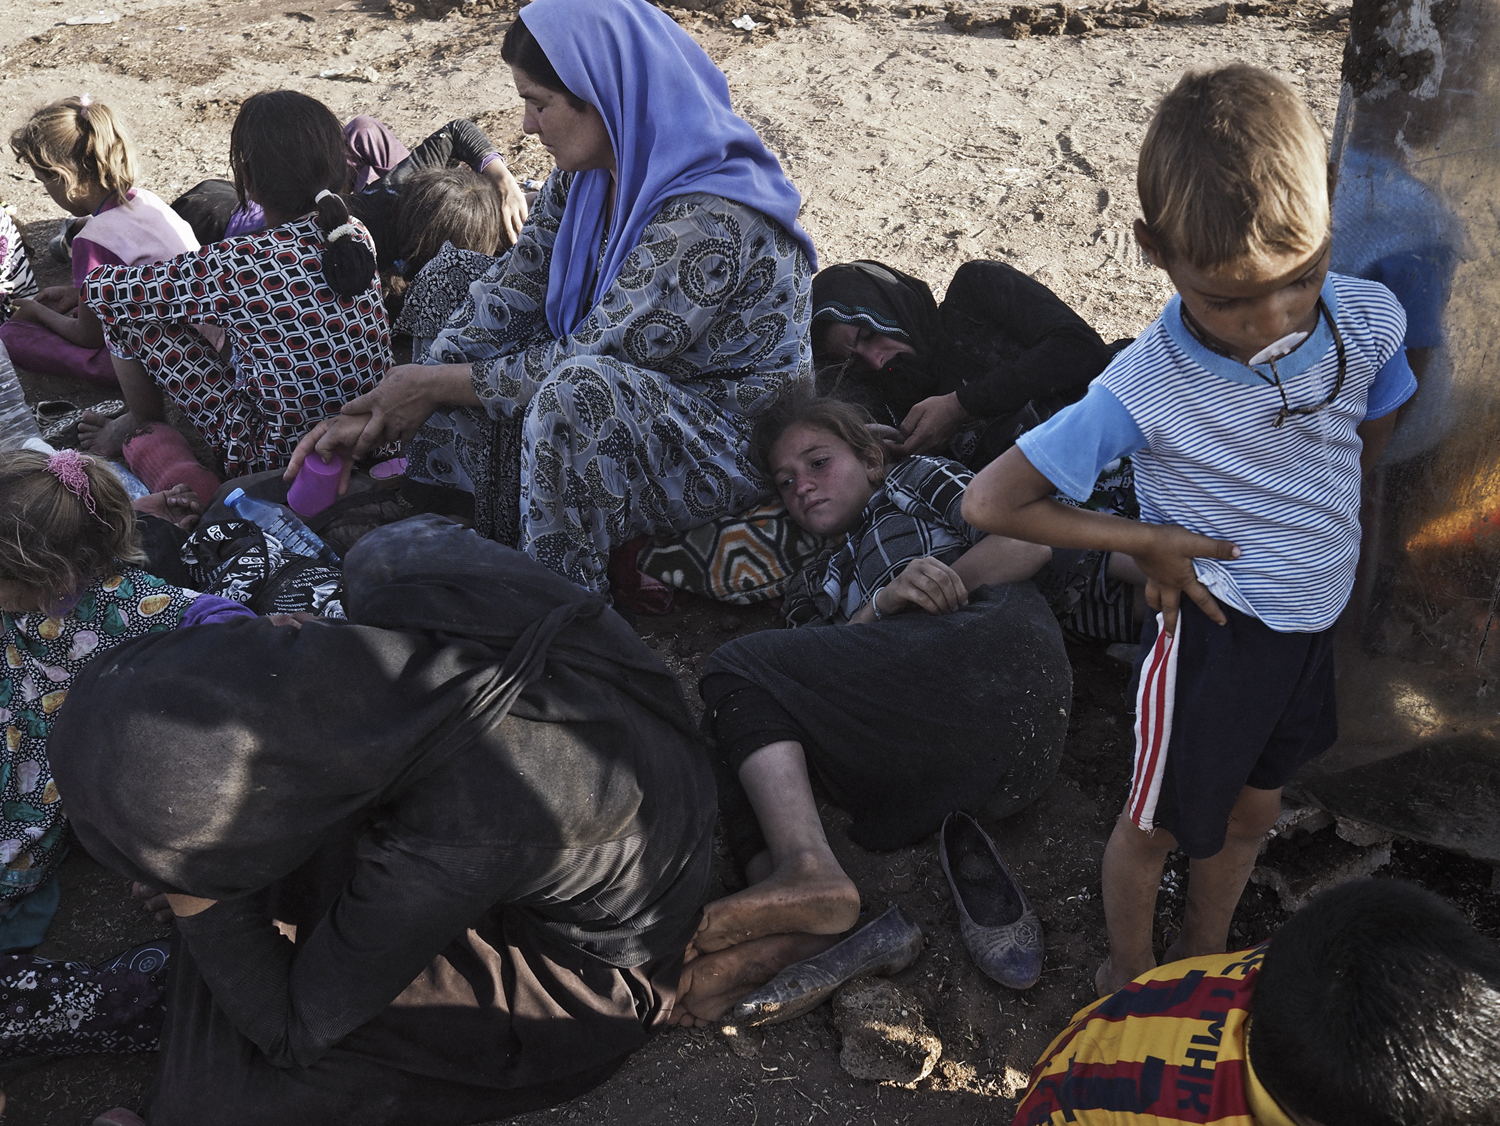 Aug. 10, 2014. Yezidi women and children from Sinjar, Iraq, rest at a makeshift camp on the outskirts of Derek, a Kurdish-controlled town in Syria that is located at the foot of the Sinjar Mountains along the border between Iraq and Syria. Derek, Syria.